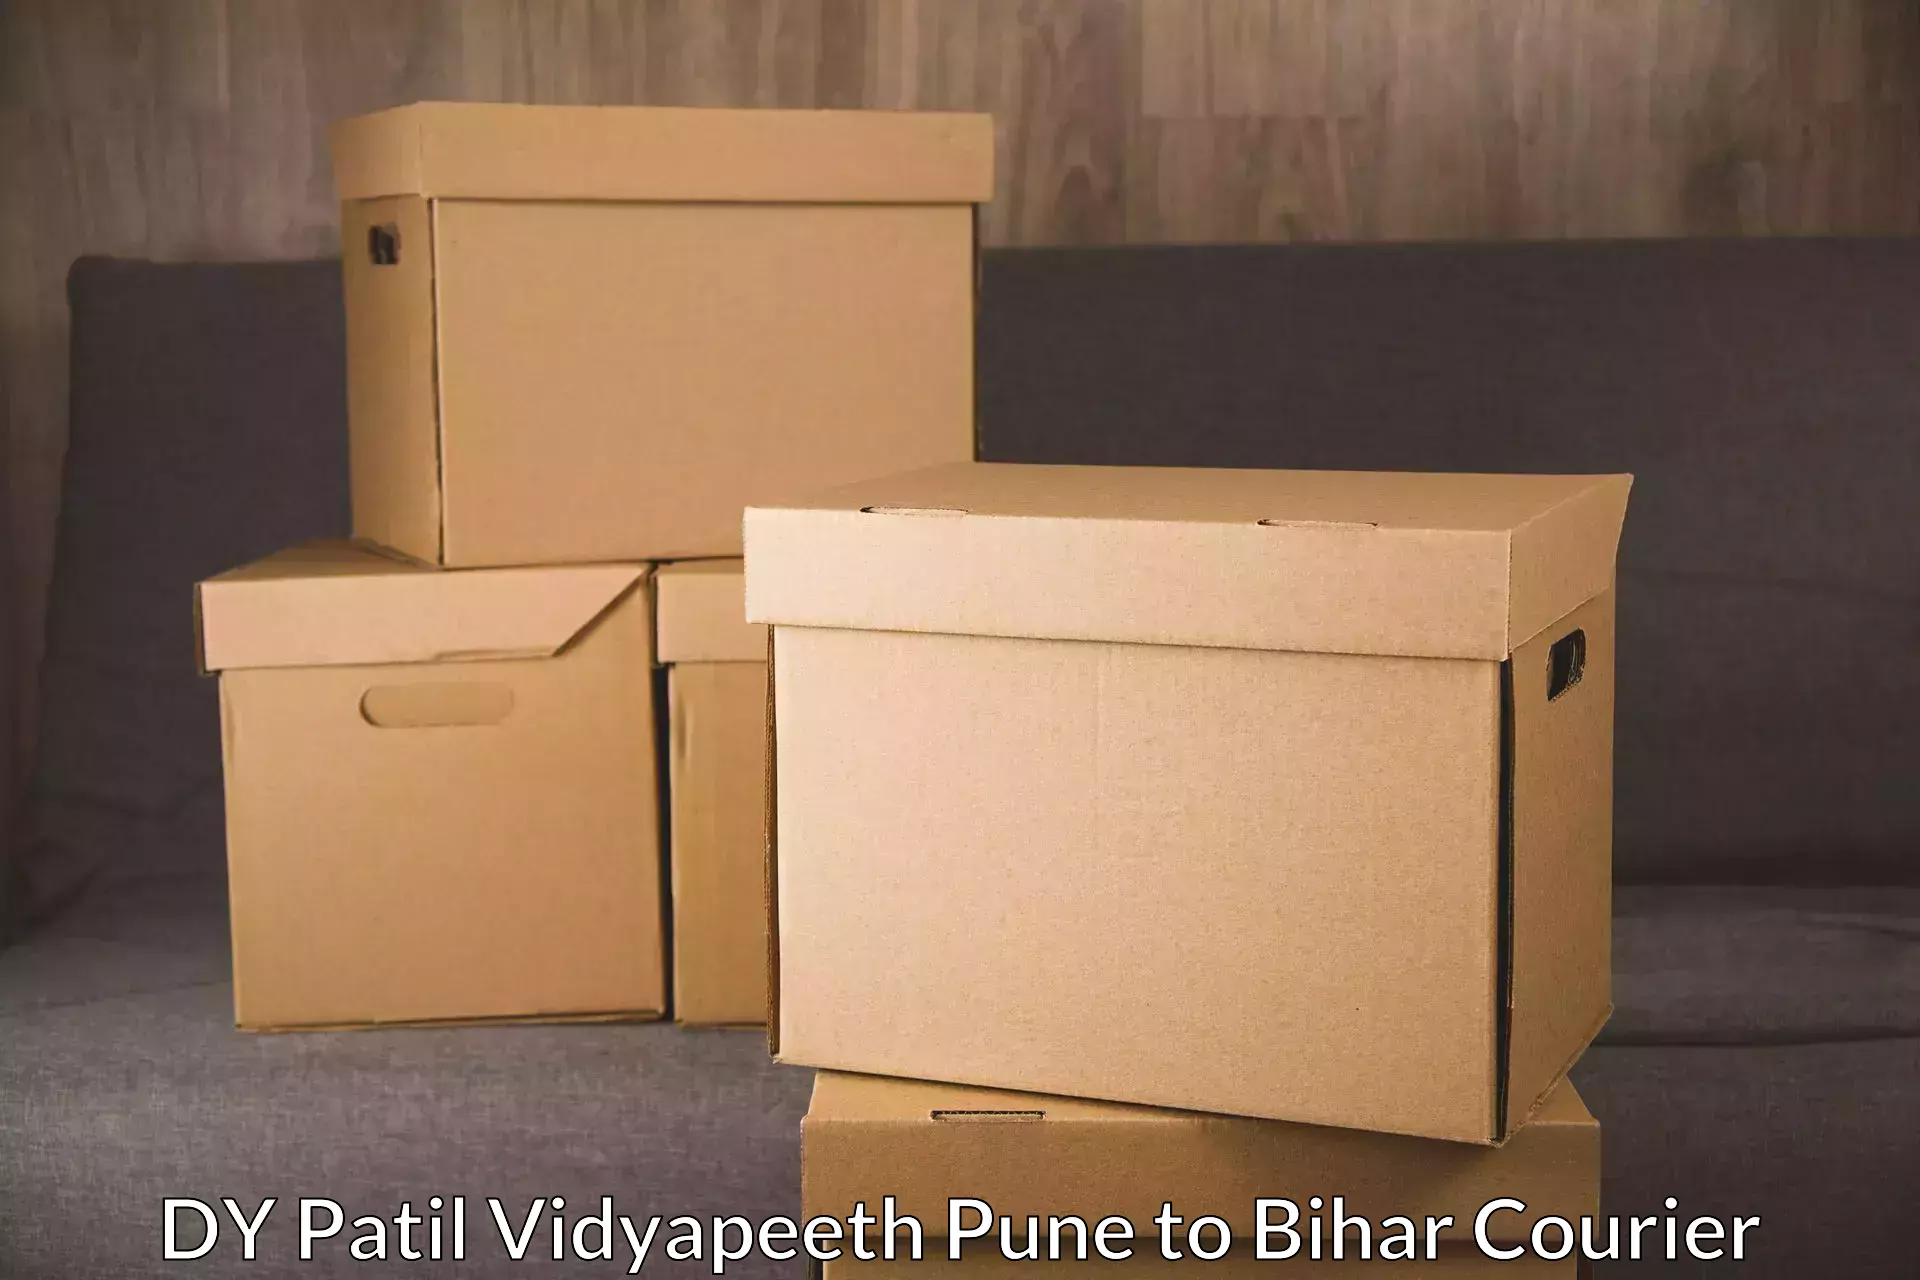 Business shipping needs DY Patil Vidyapeeth Pune to Fatwah